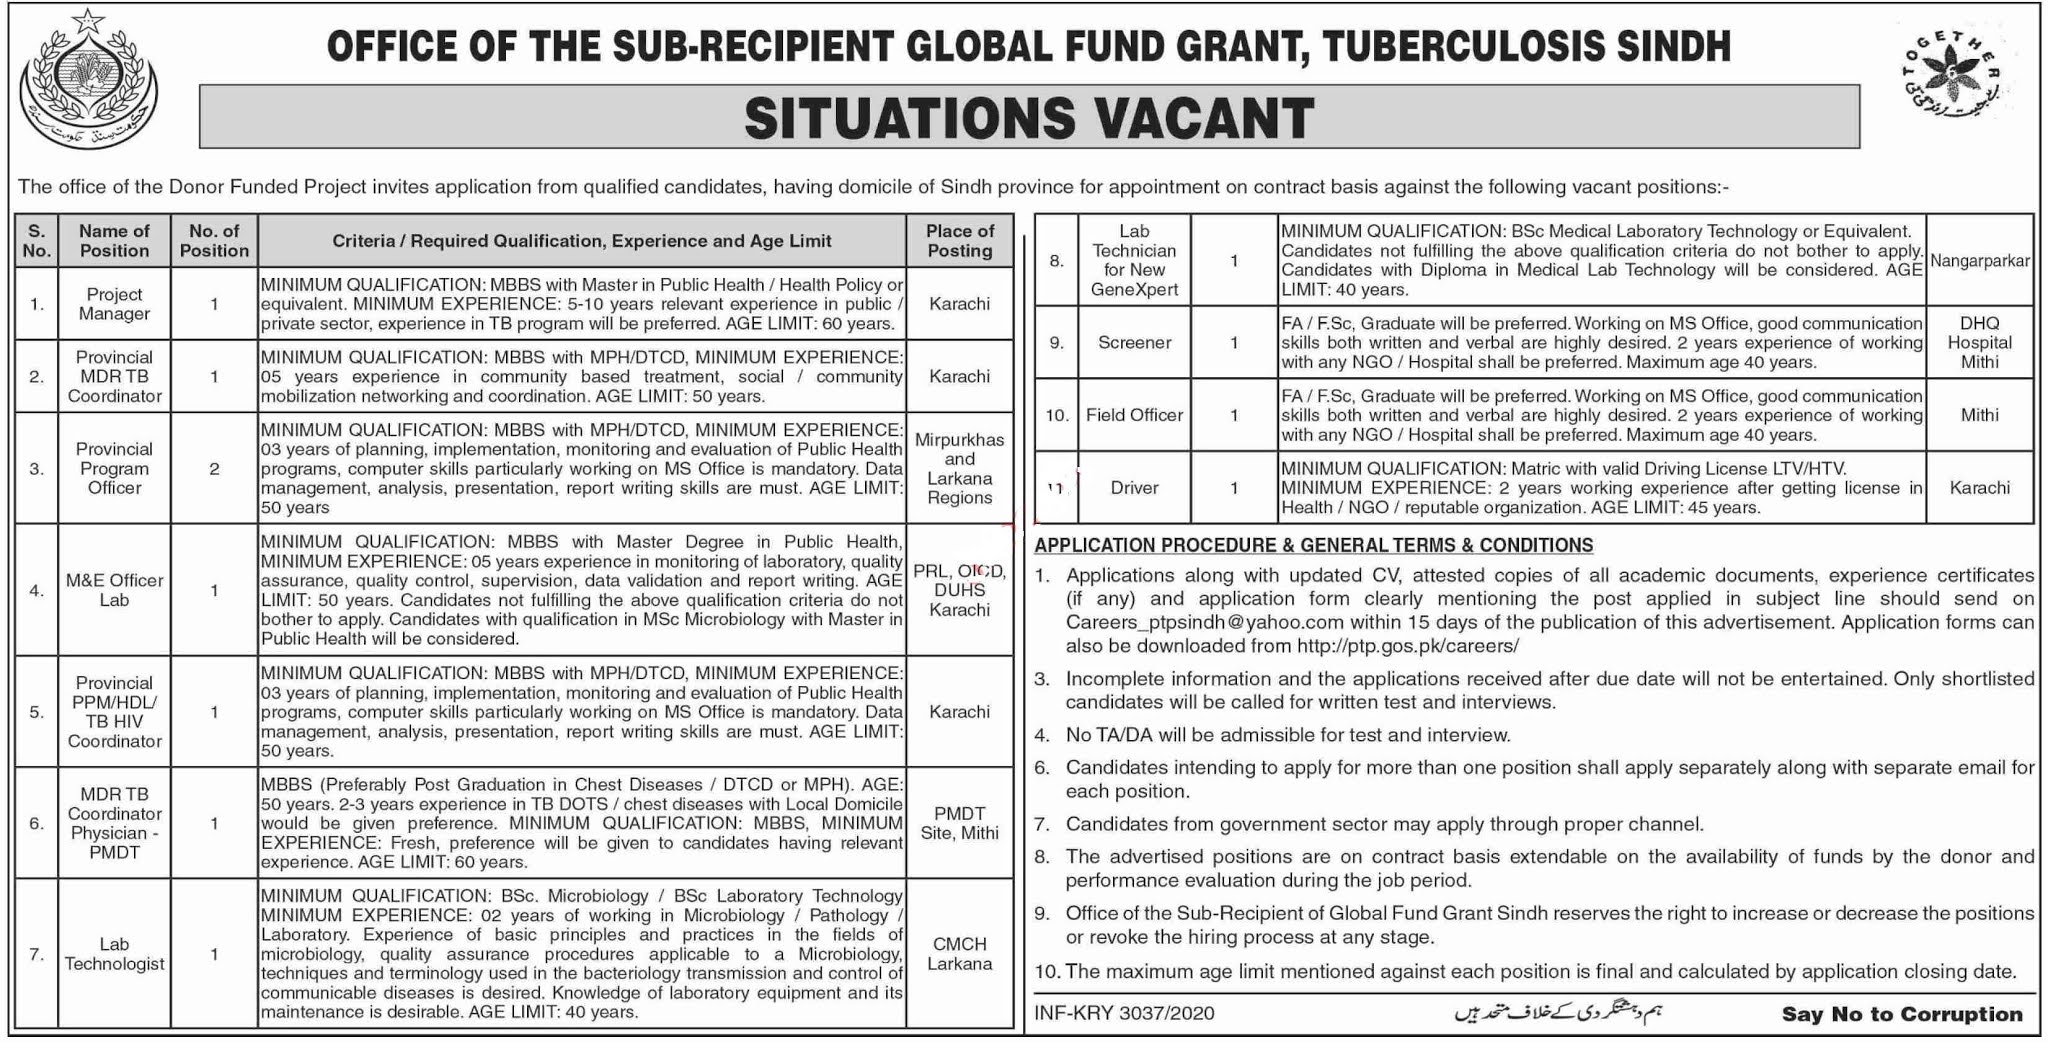 Global Fund Grand Tuberculosis Sindh Jobs 2020 for Project Manager, Lab Technician and more